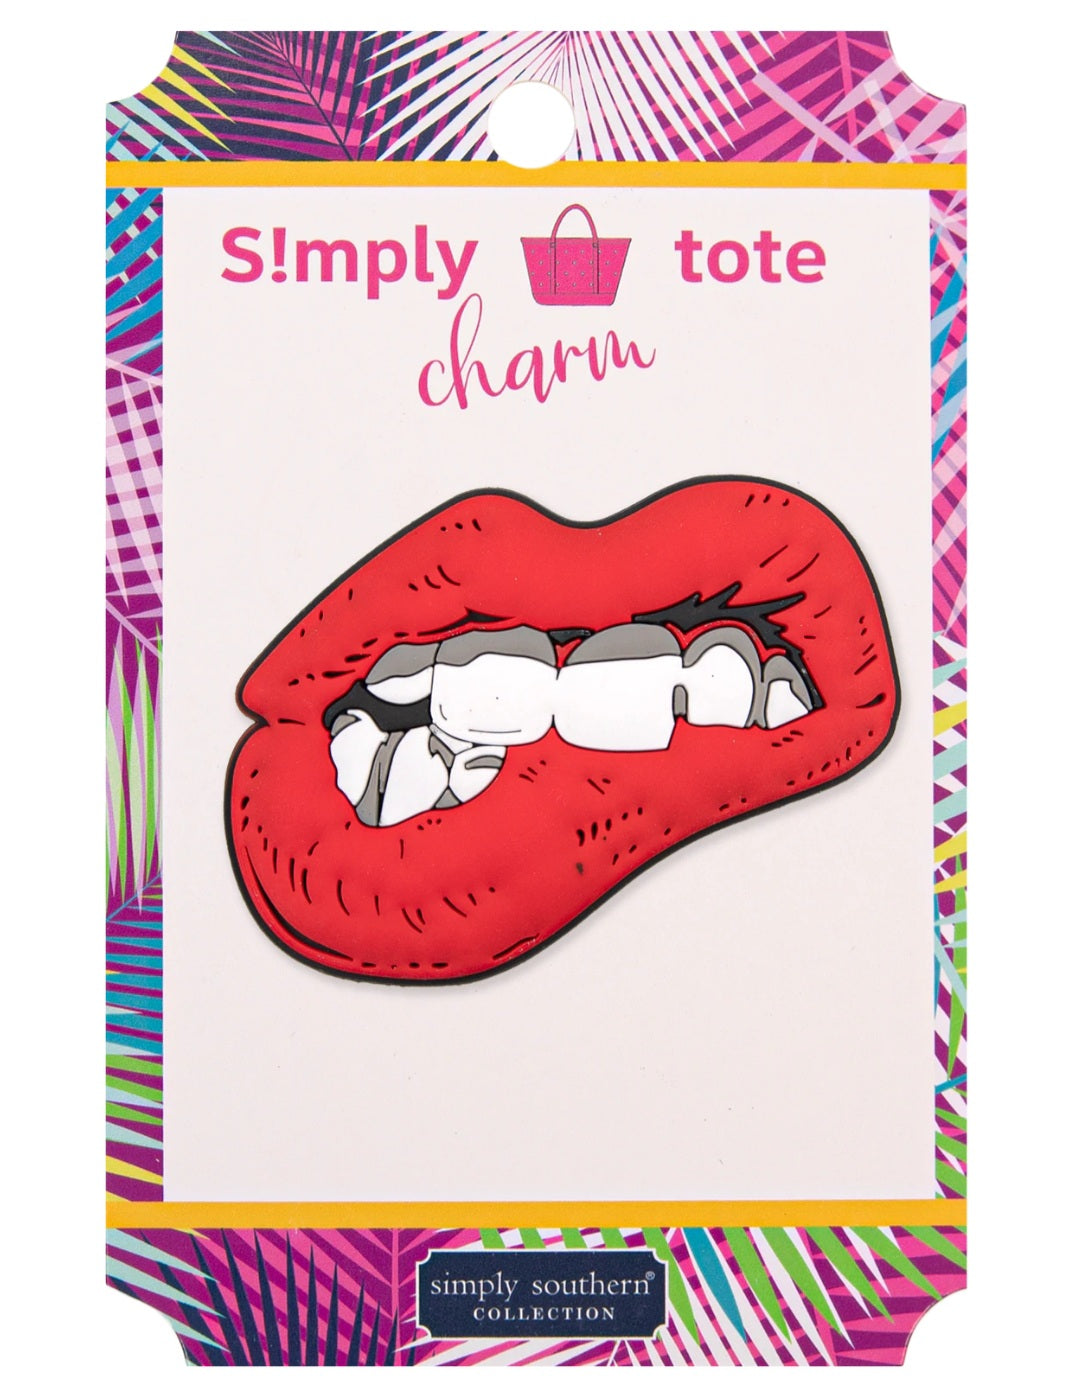 Simply tote charms